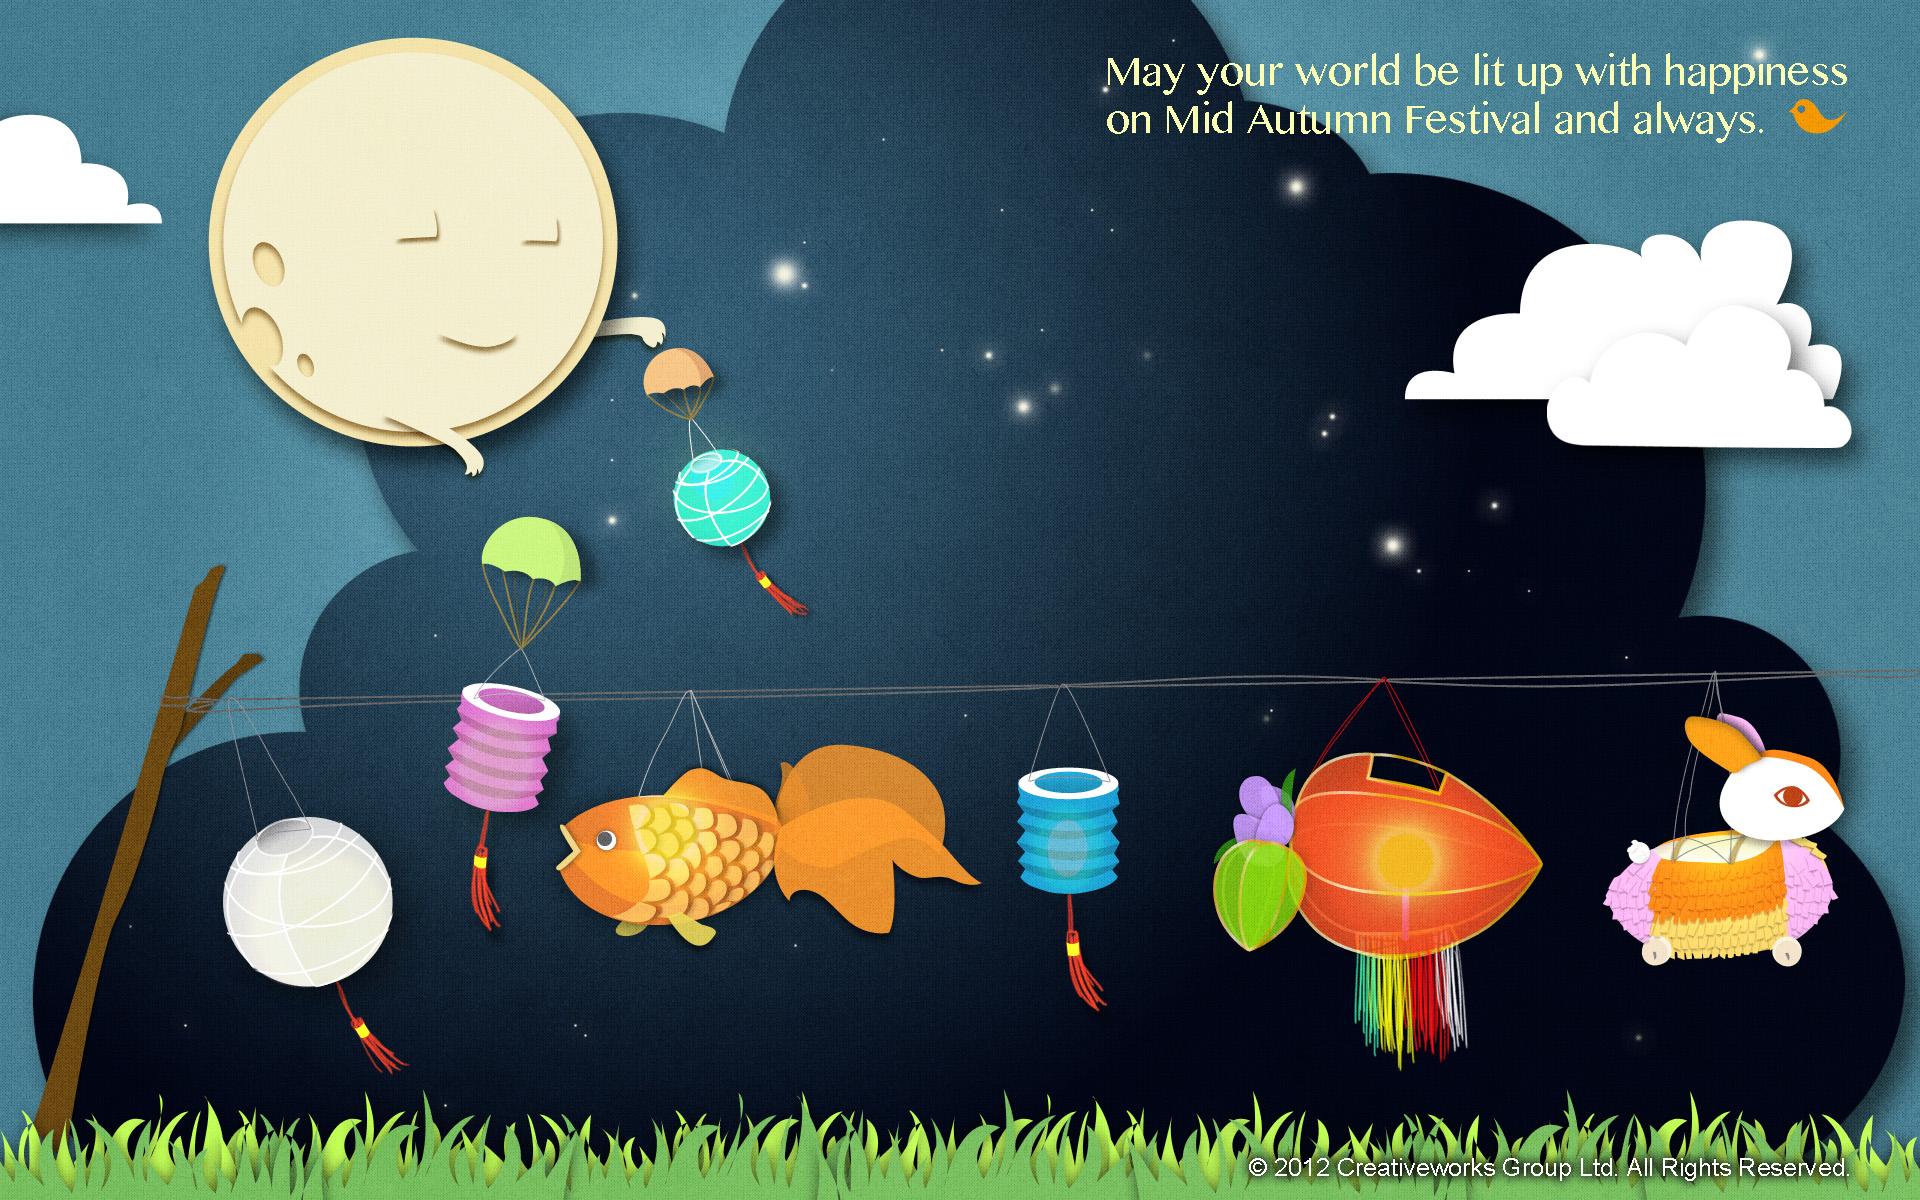 Free download mid autumn festival 2012 Creativeworks